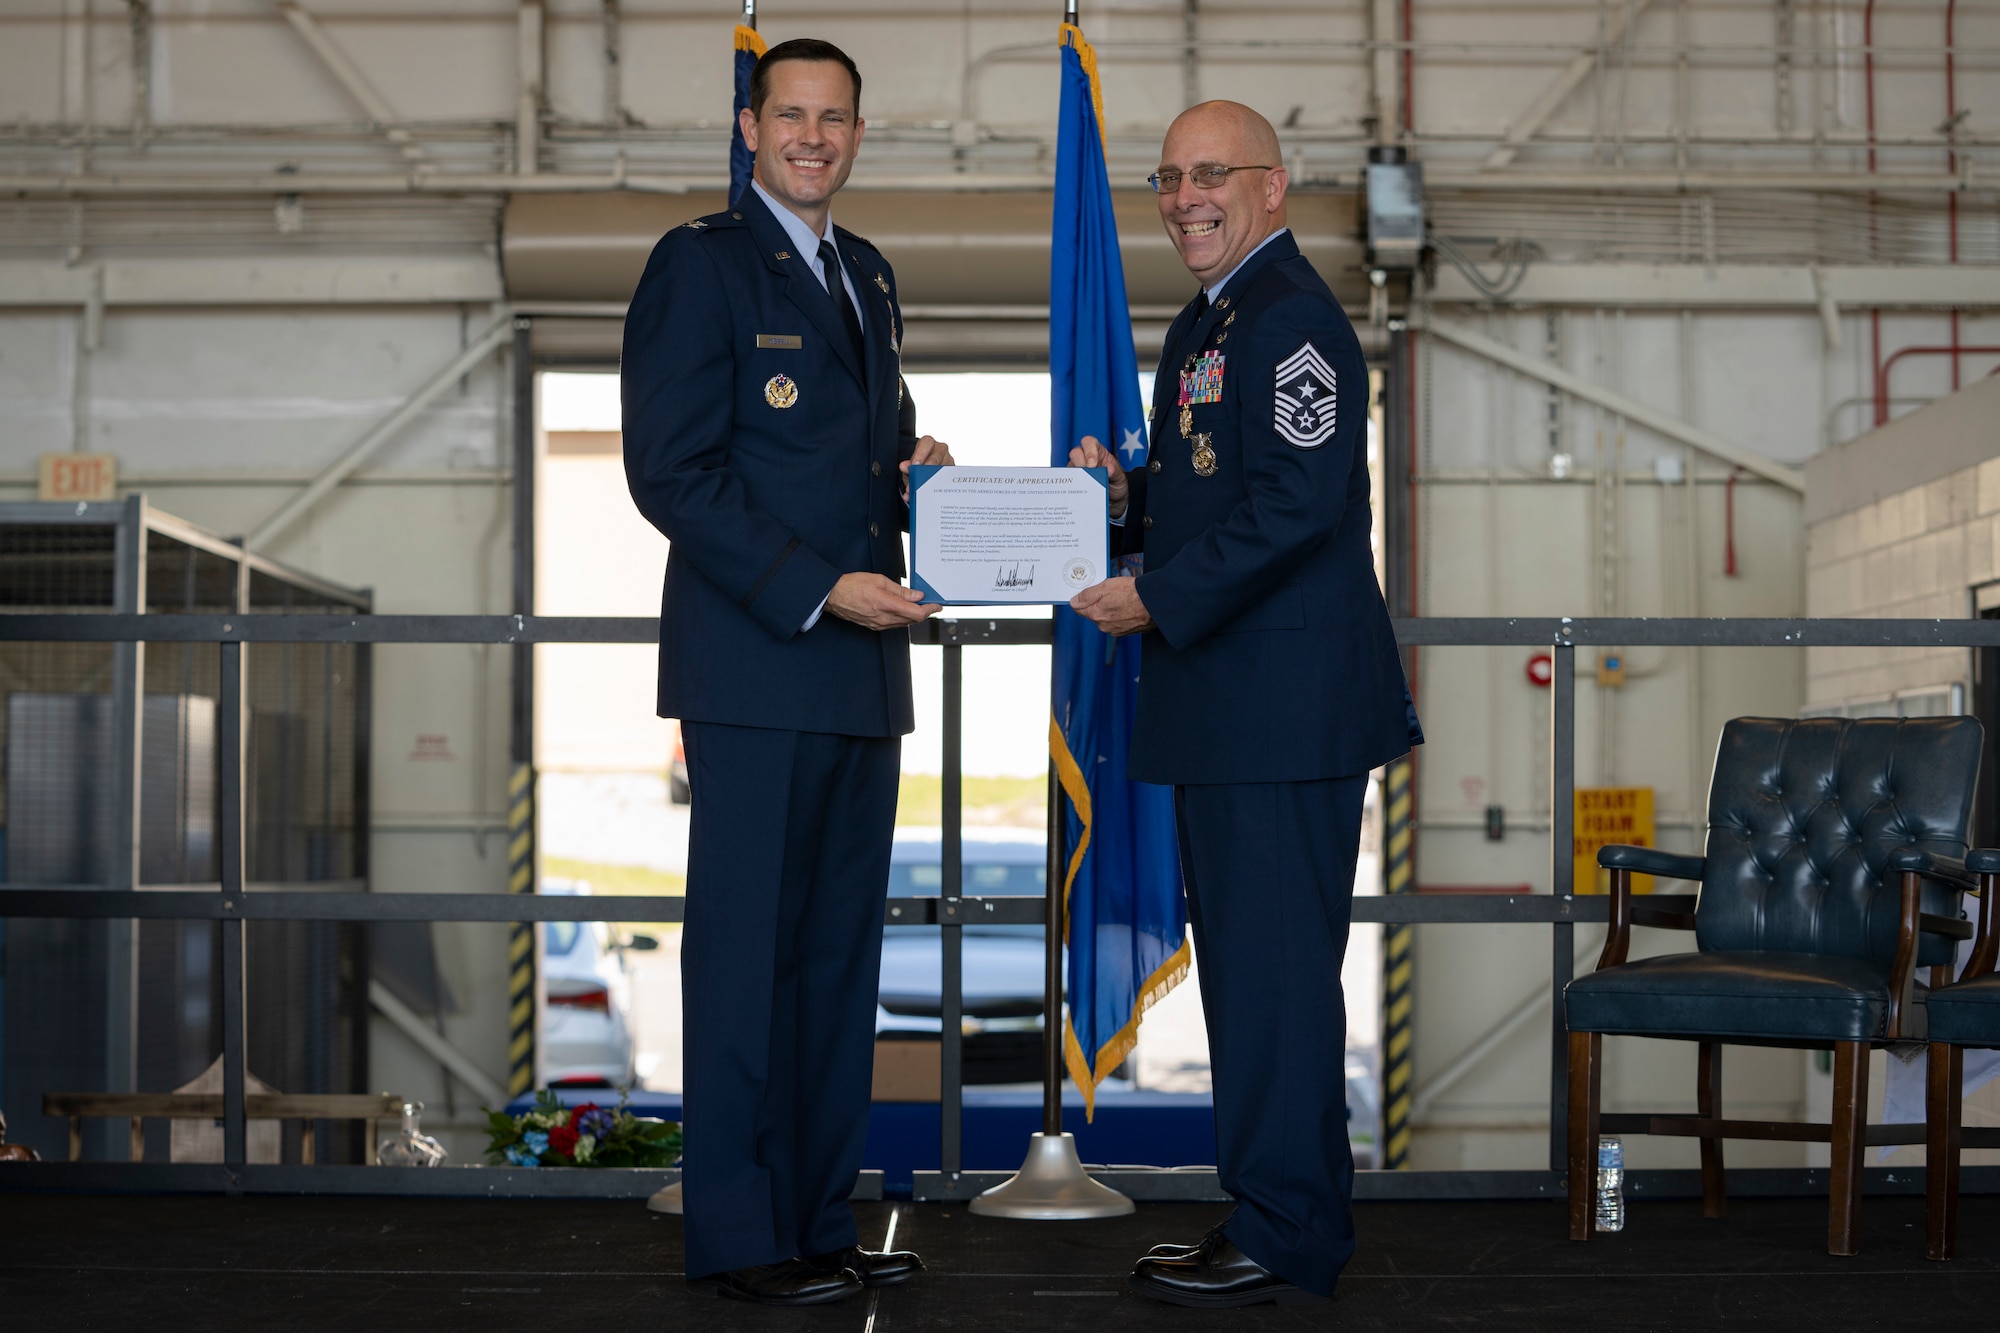 Chief Master Sgt. Peter Webb and Col. Kevin Merrill hold a retirement certificate for a photo during Webb's retirement ceremony.